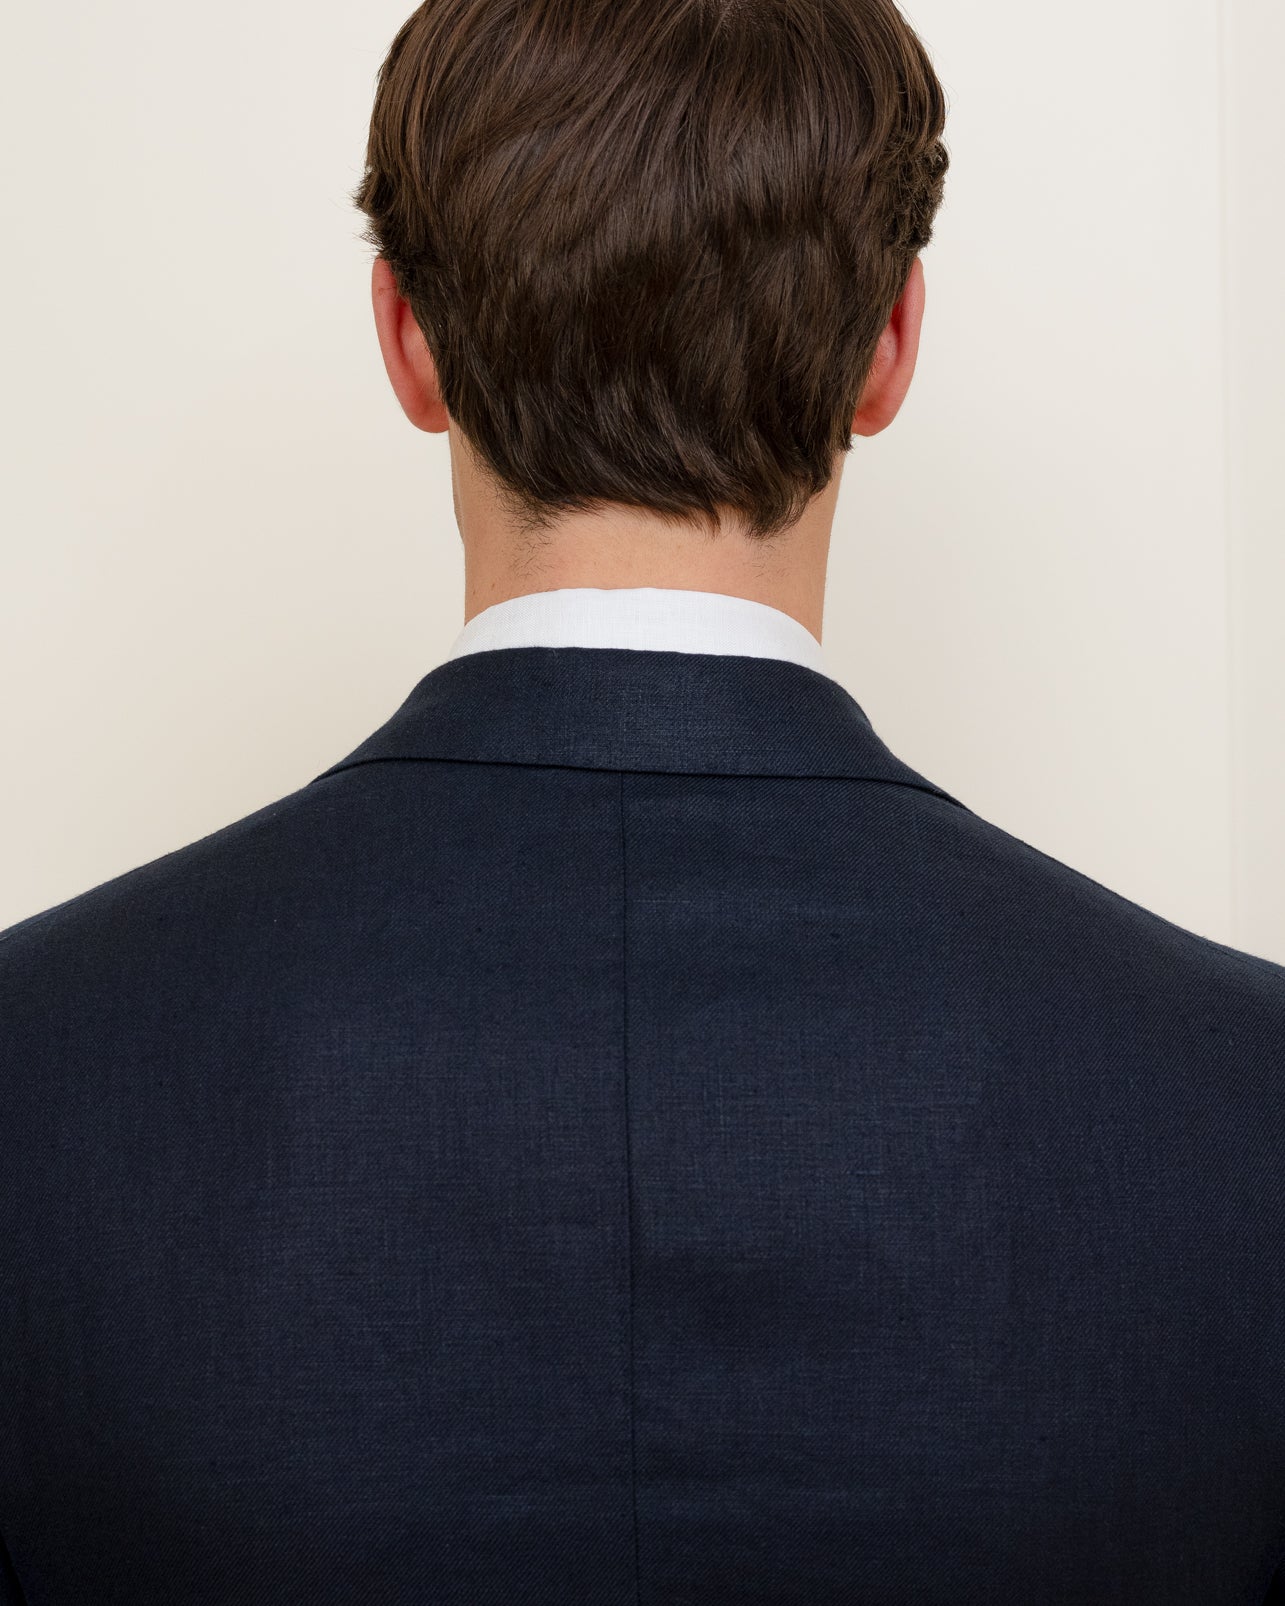 The back of a man wearing a navy linen suit and white shirt